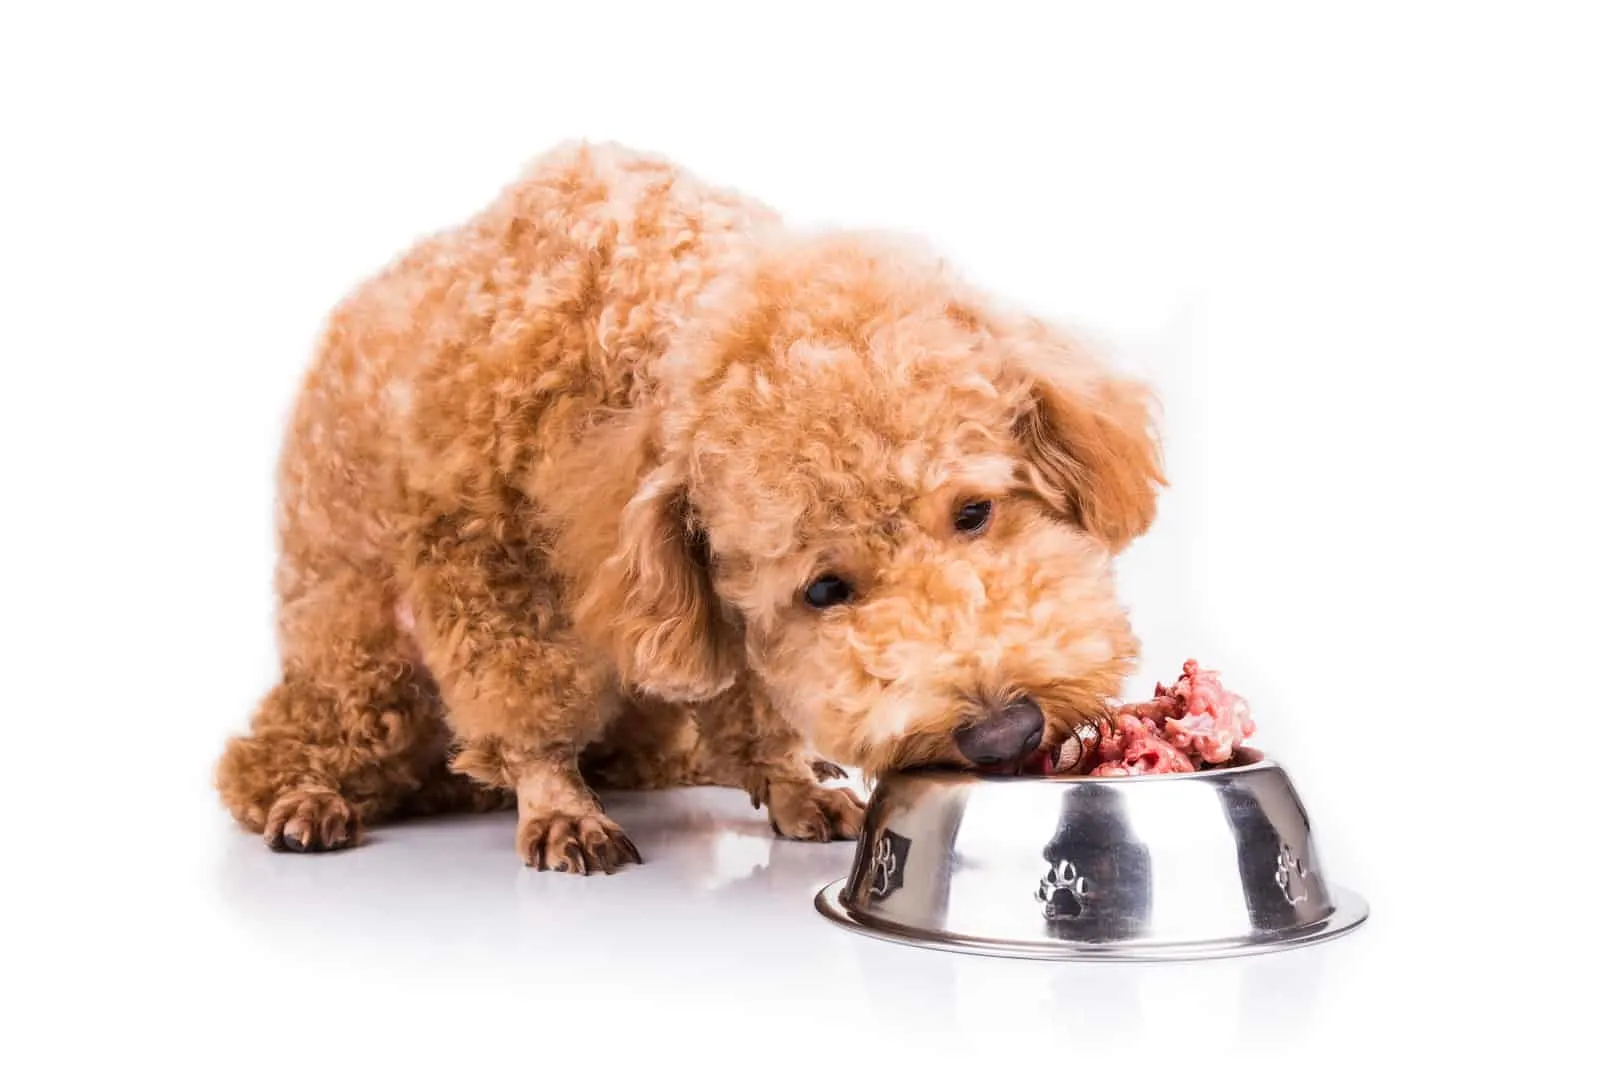 Poodle dog enjoying her nutritious and delicious meal